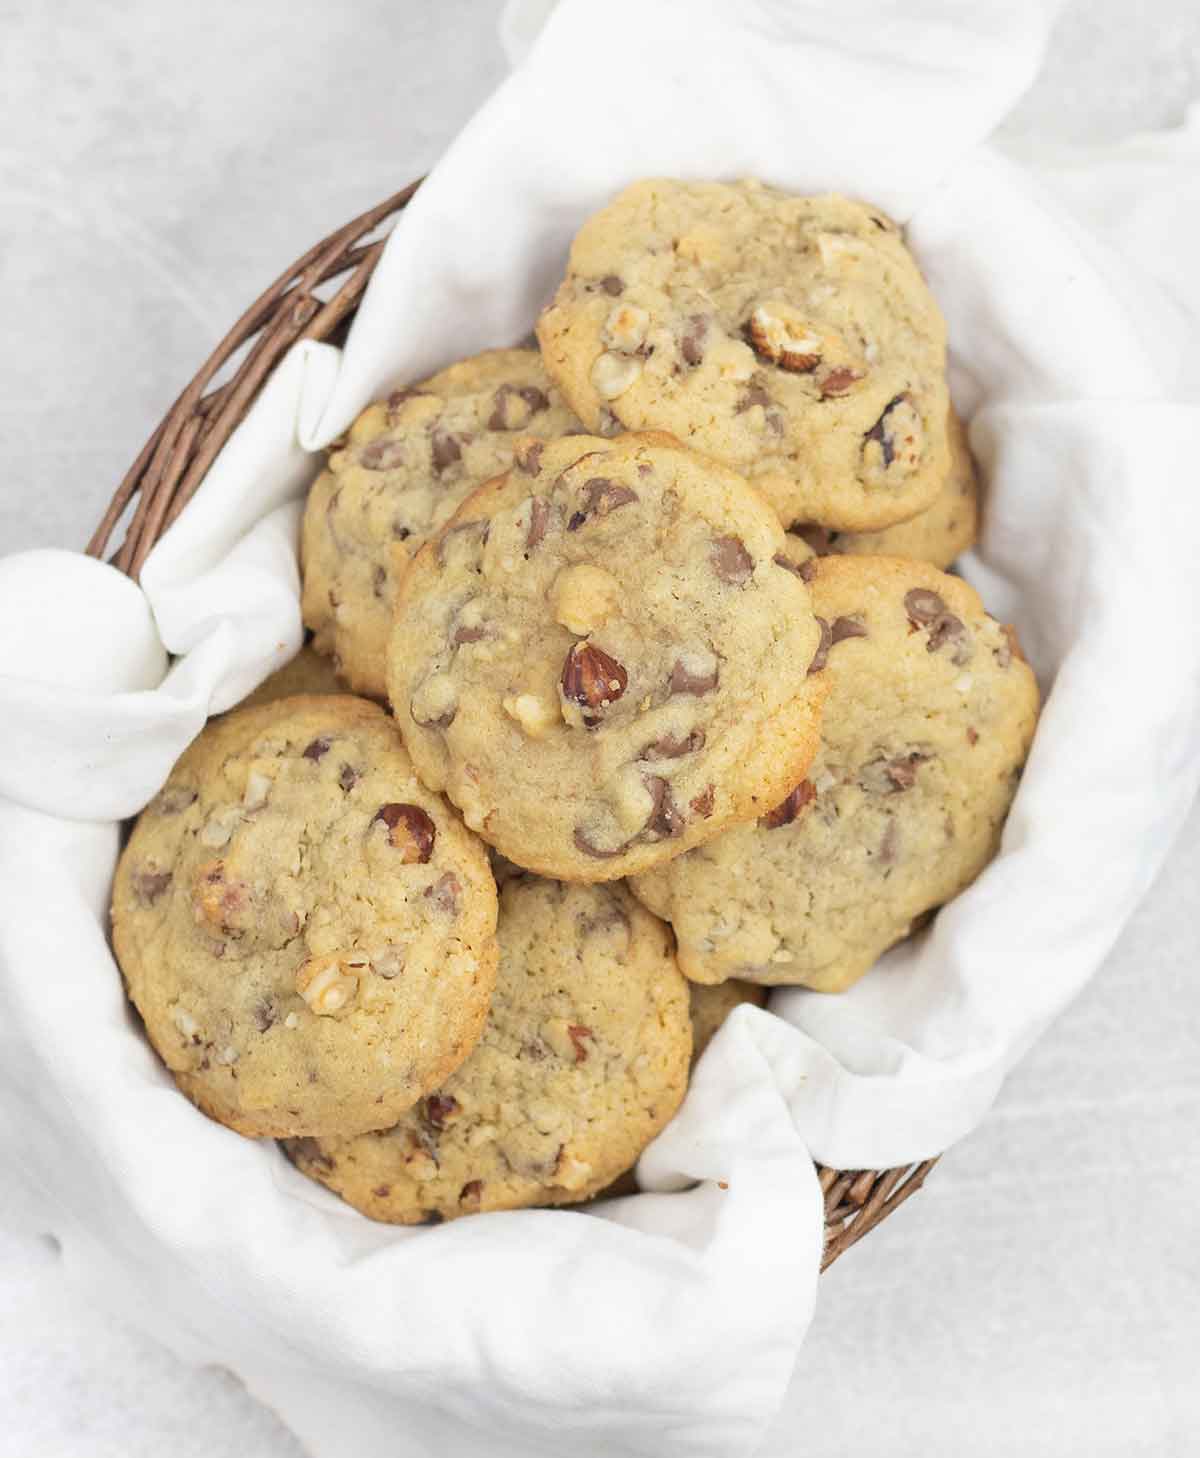 Hazelnut cookies with chocolate chips in a basket.